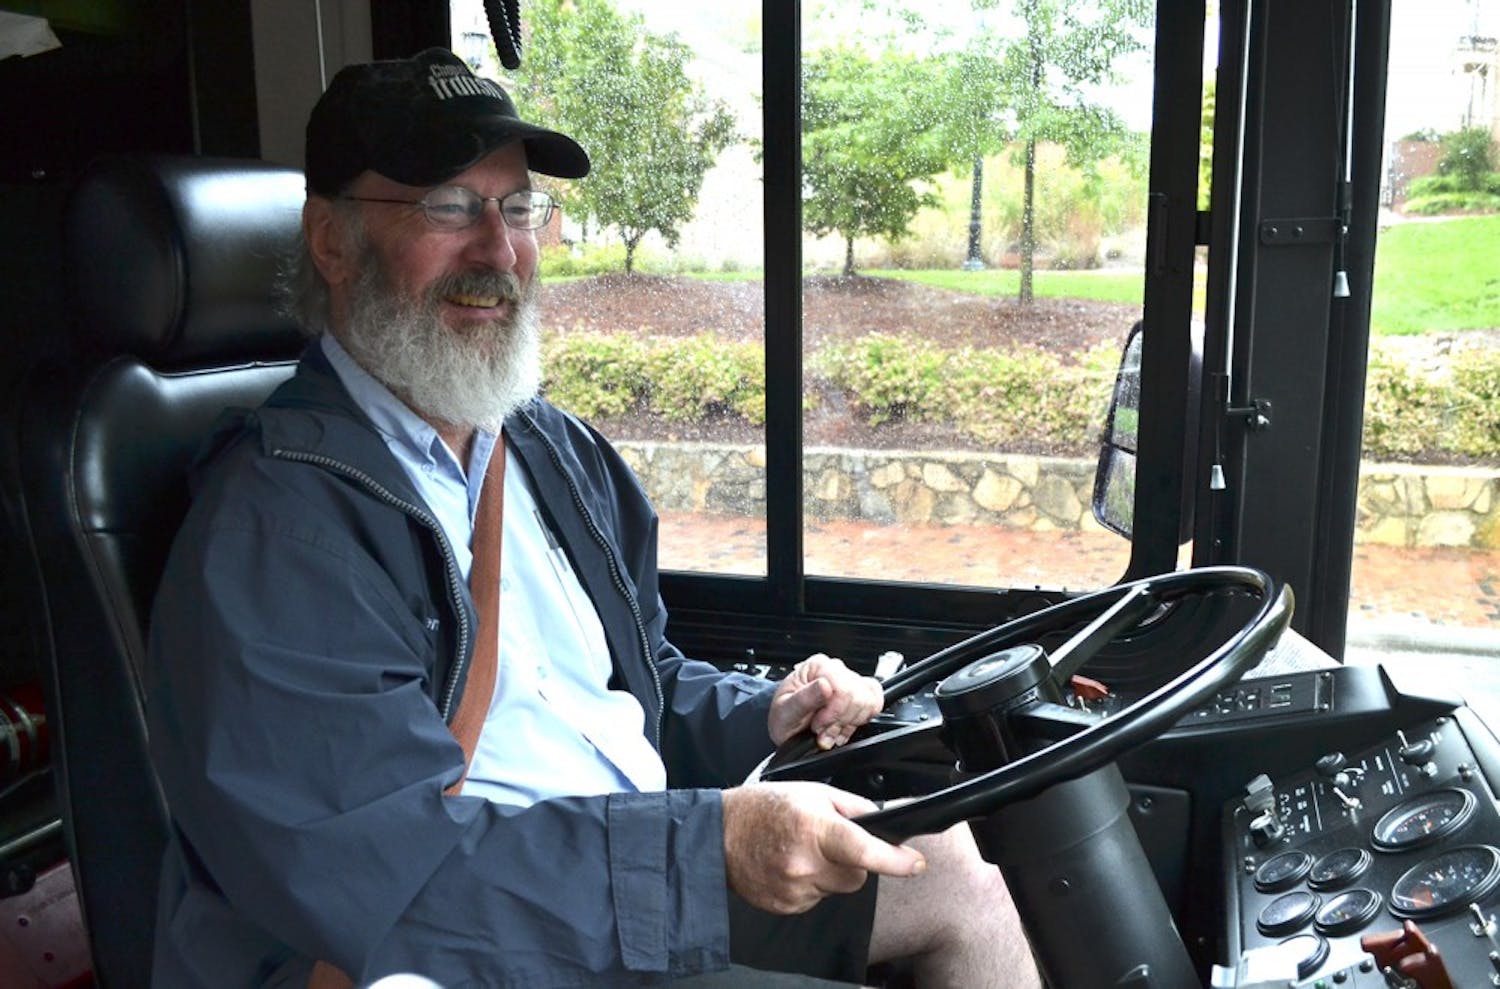 J Bus driver David Deming discusses the quotes he posts in his bus during his morning route.